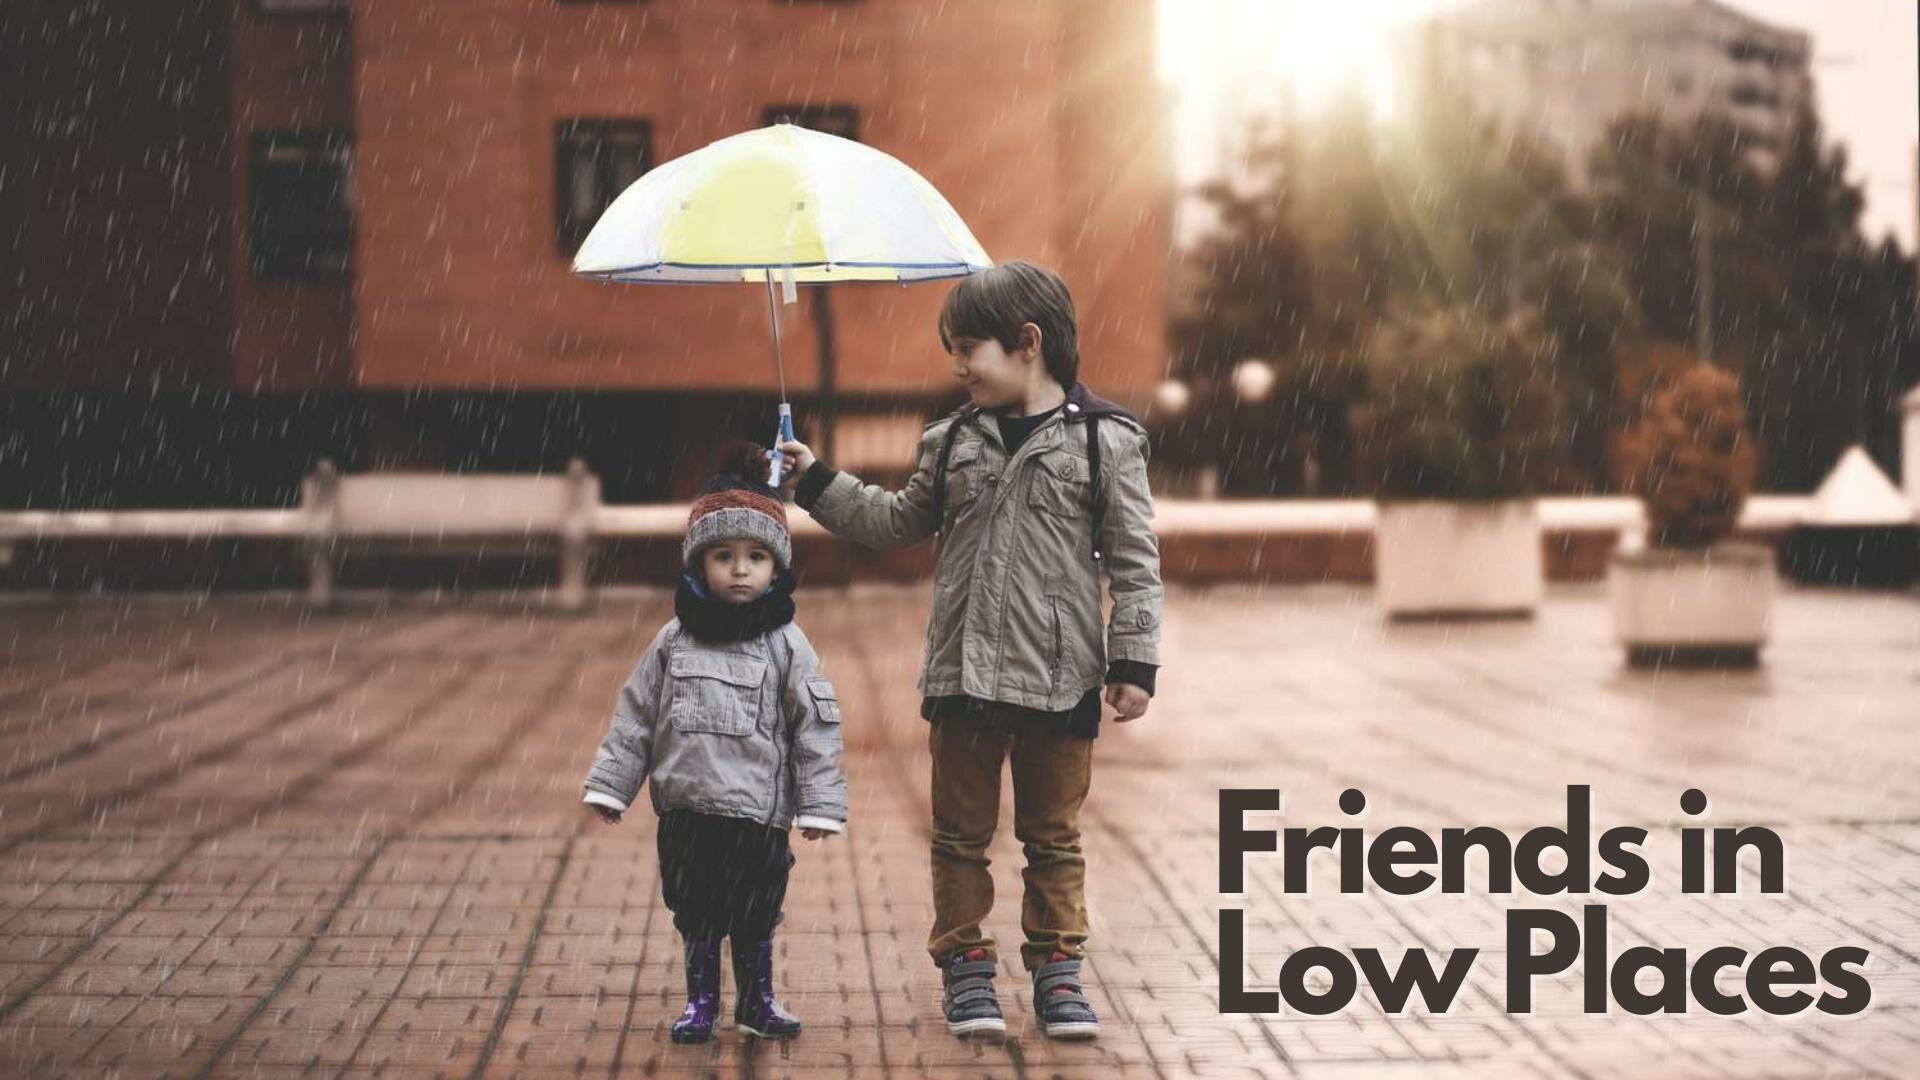 Friends in Low Places, Children's Message